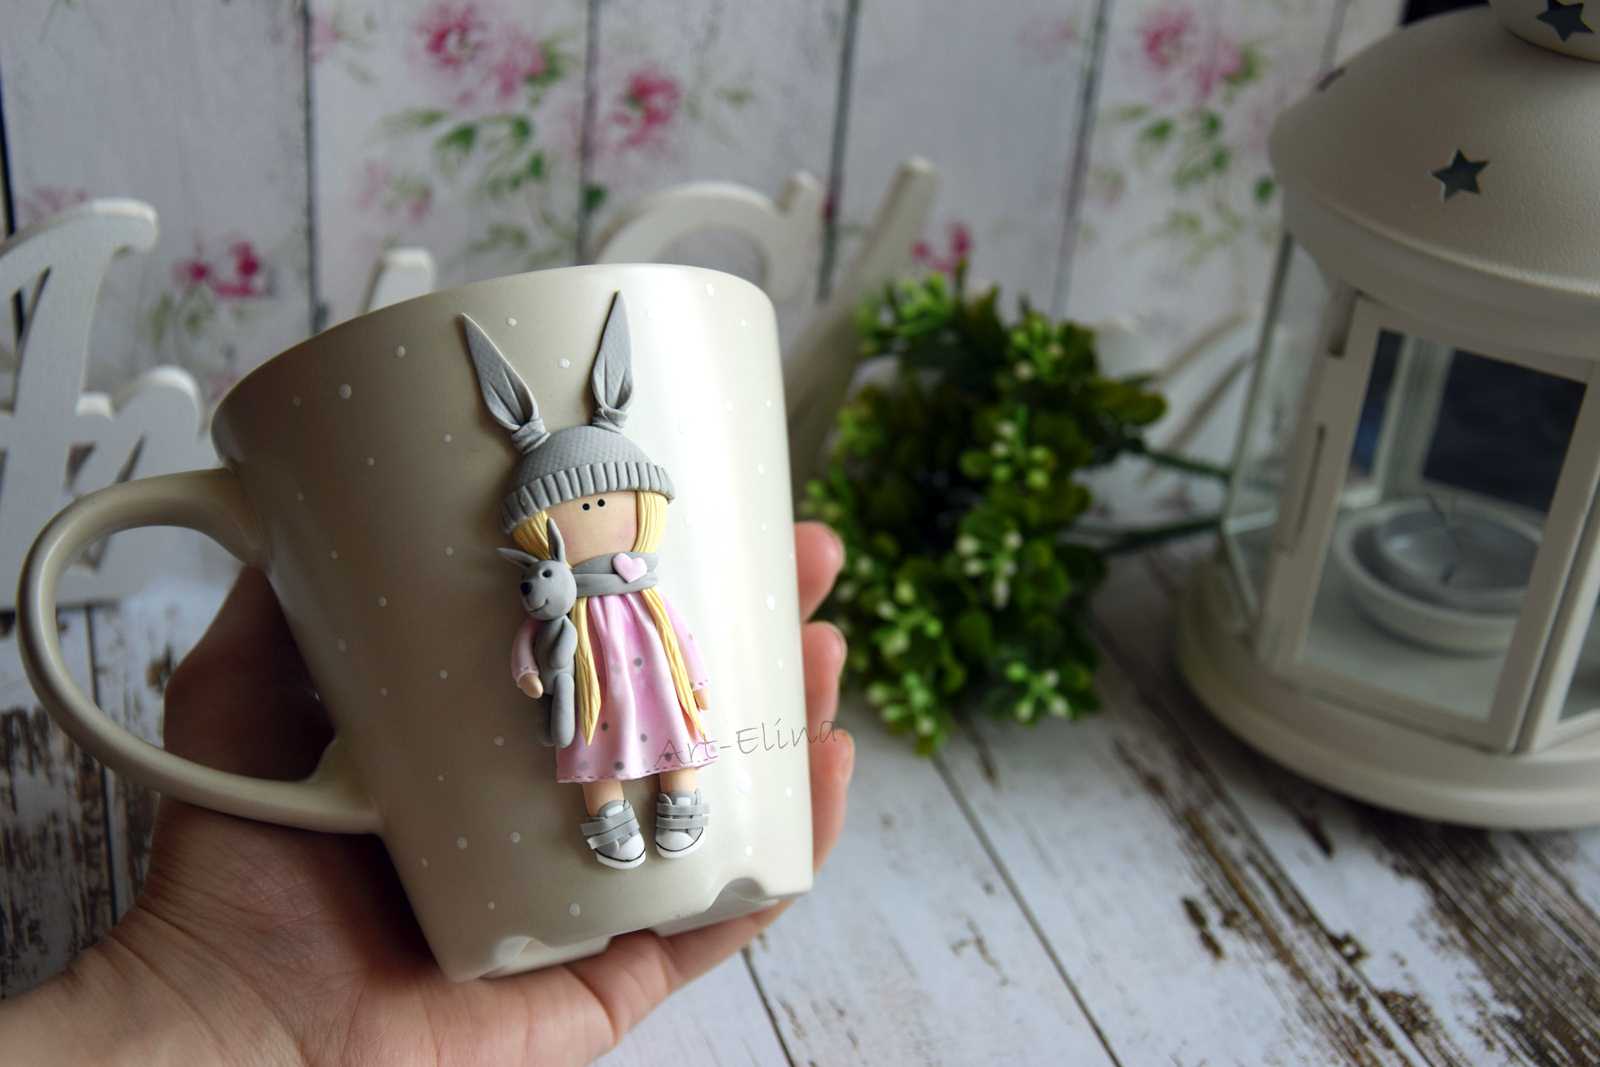 do-it-yourself vivid decoration of the mug with polymer clay animals